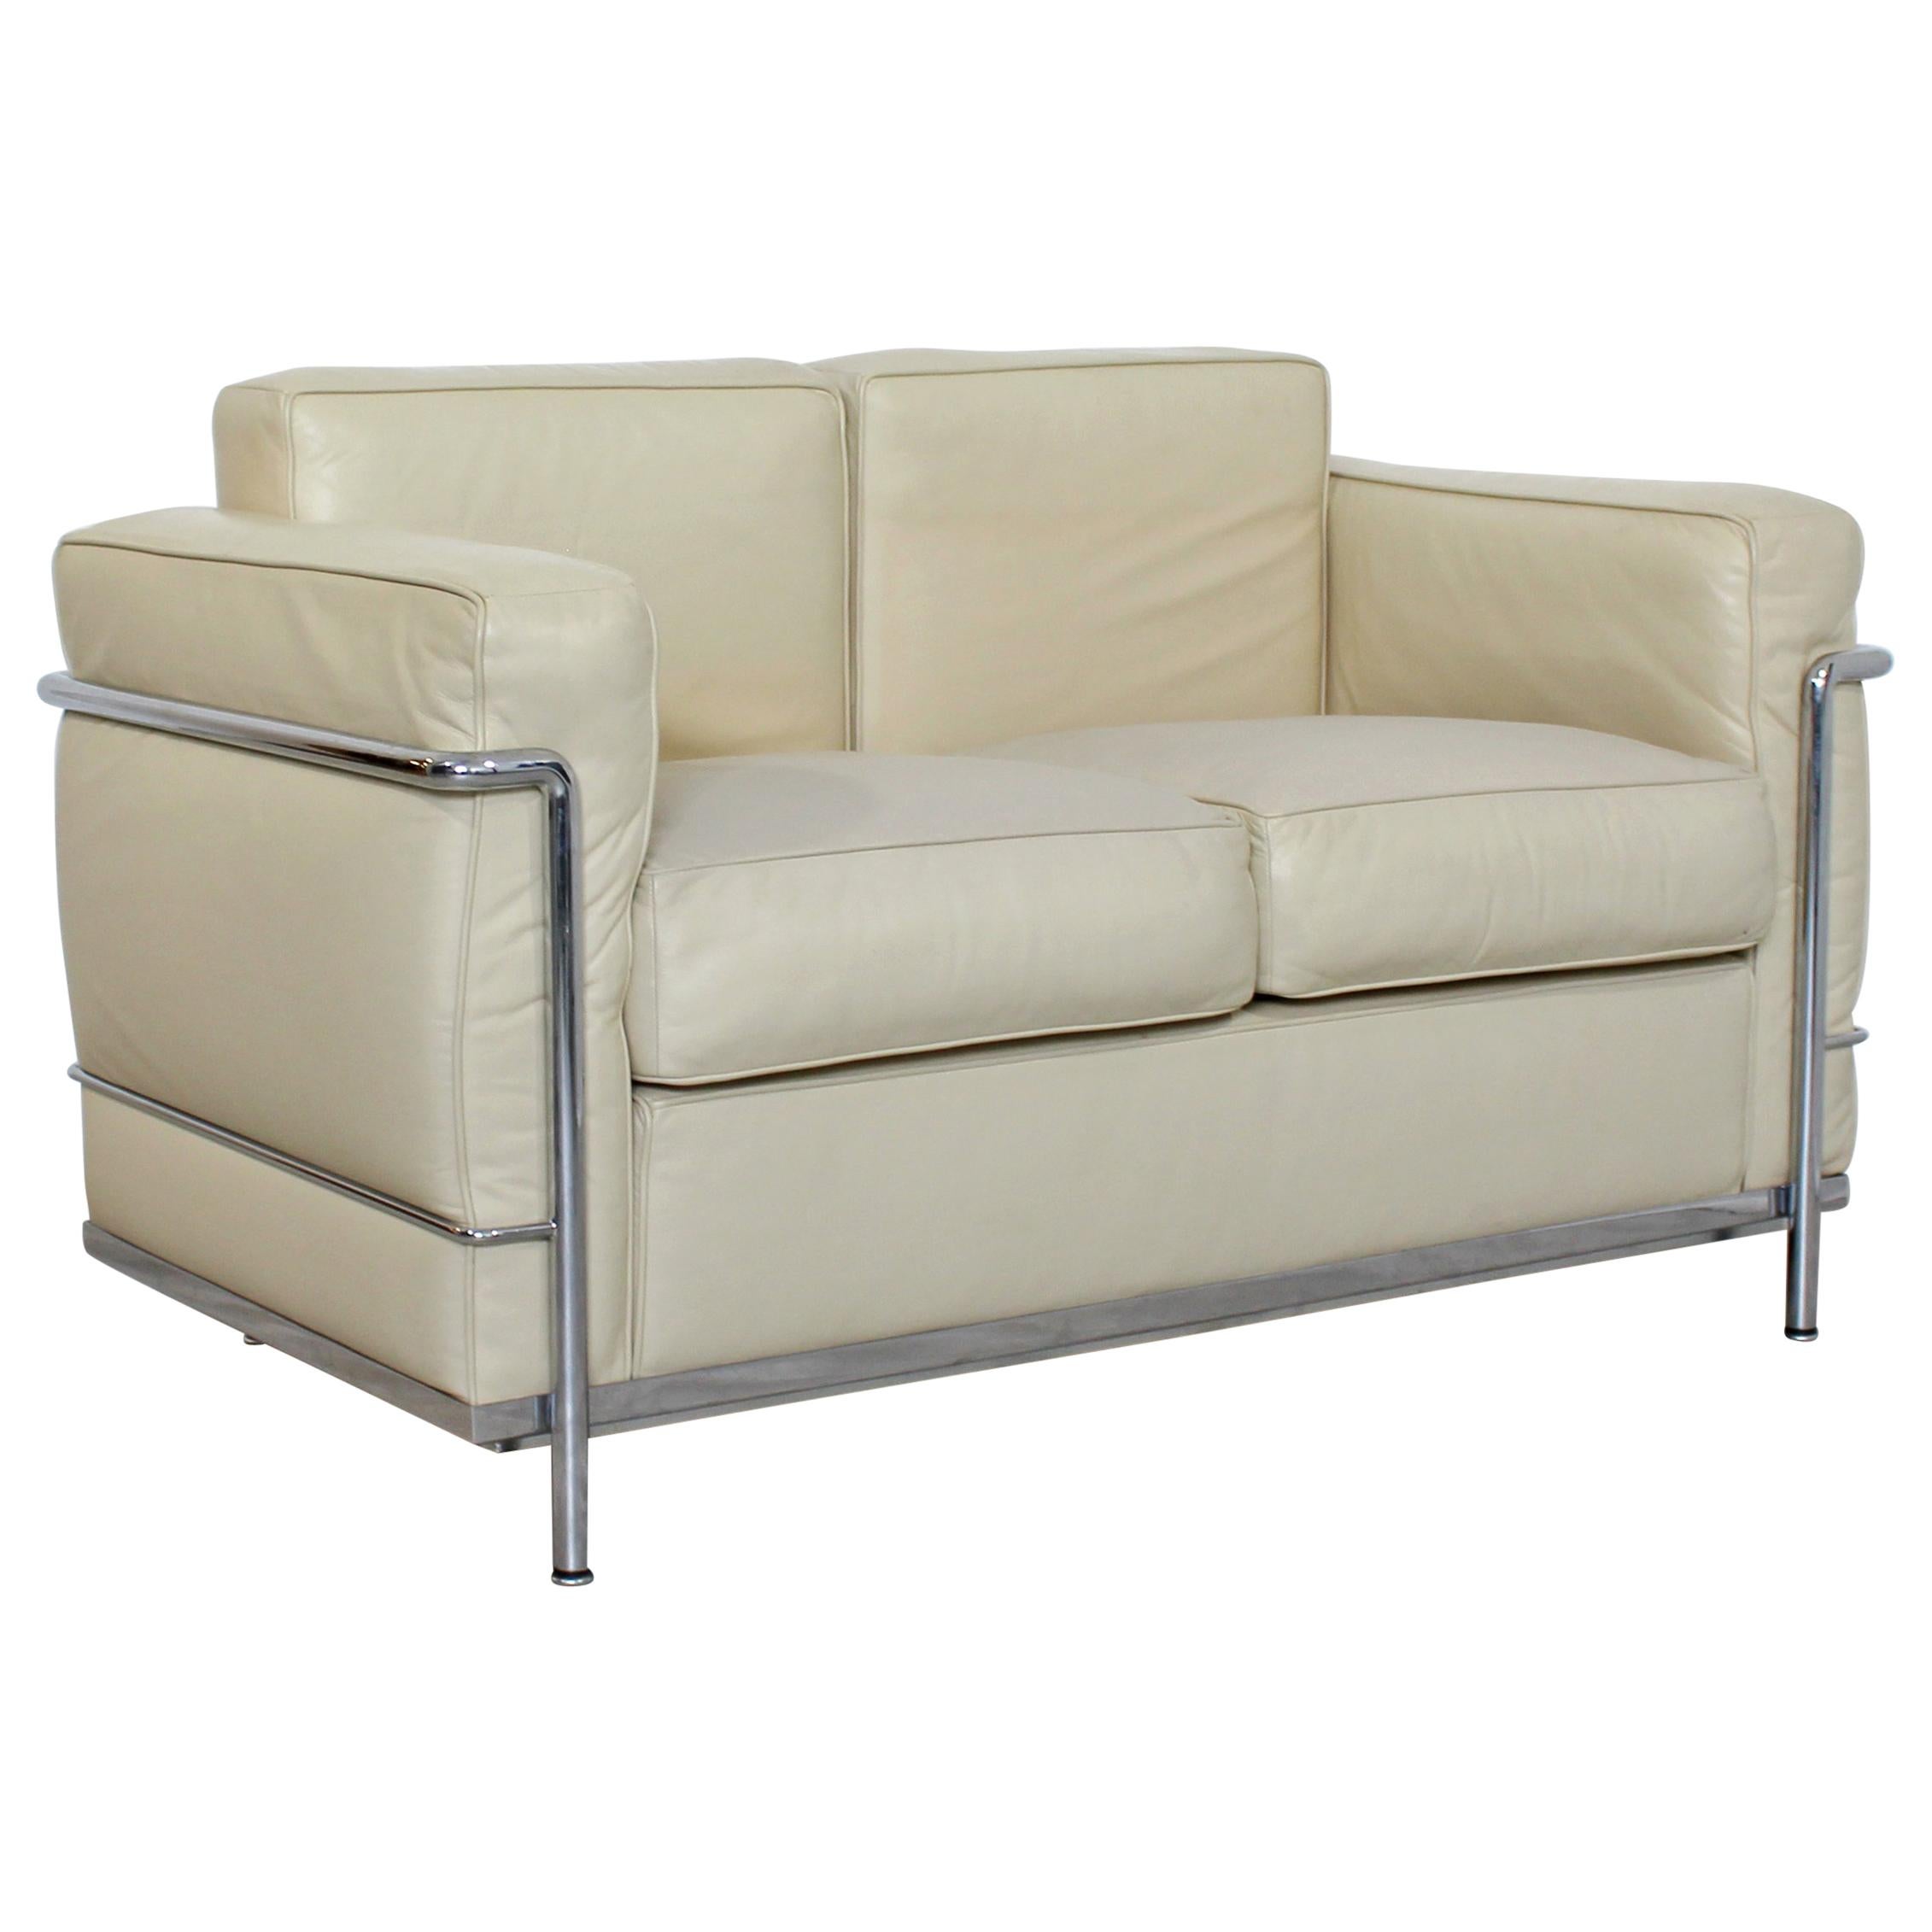 Modern Contemporary Le Corbusier Cream Leather and Chrome Loveseat Sofa Italy